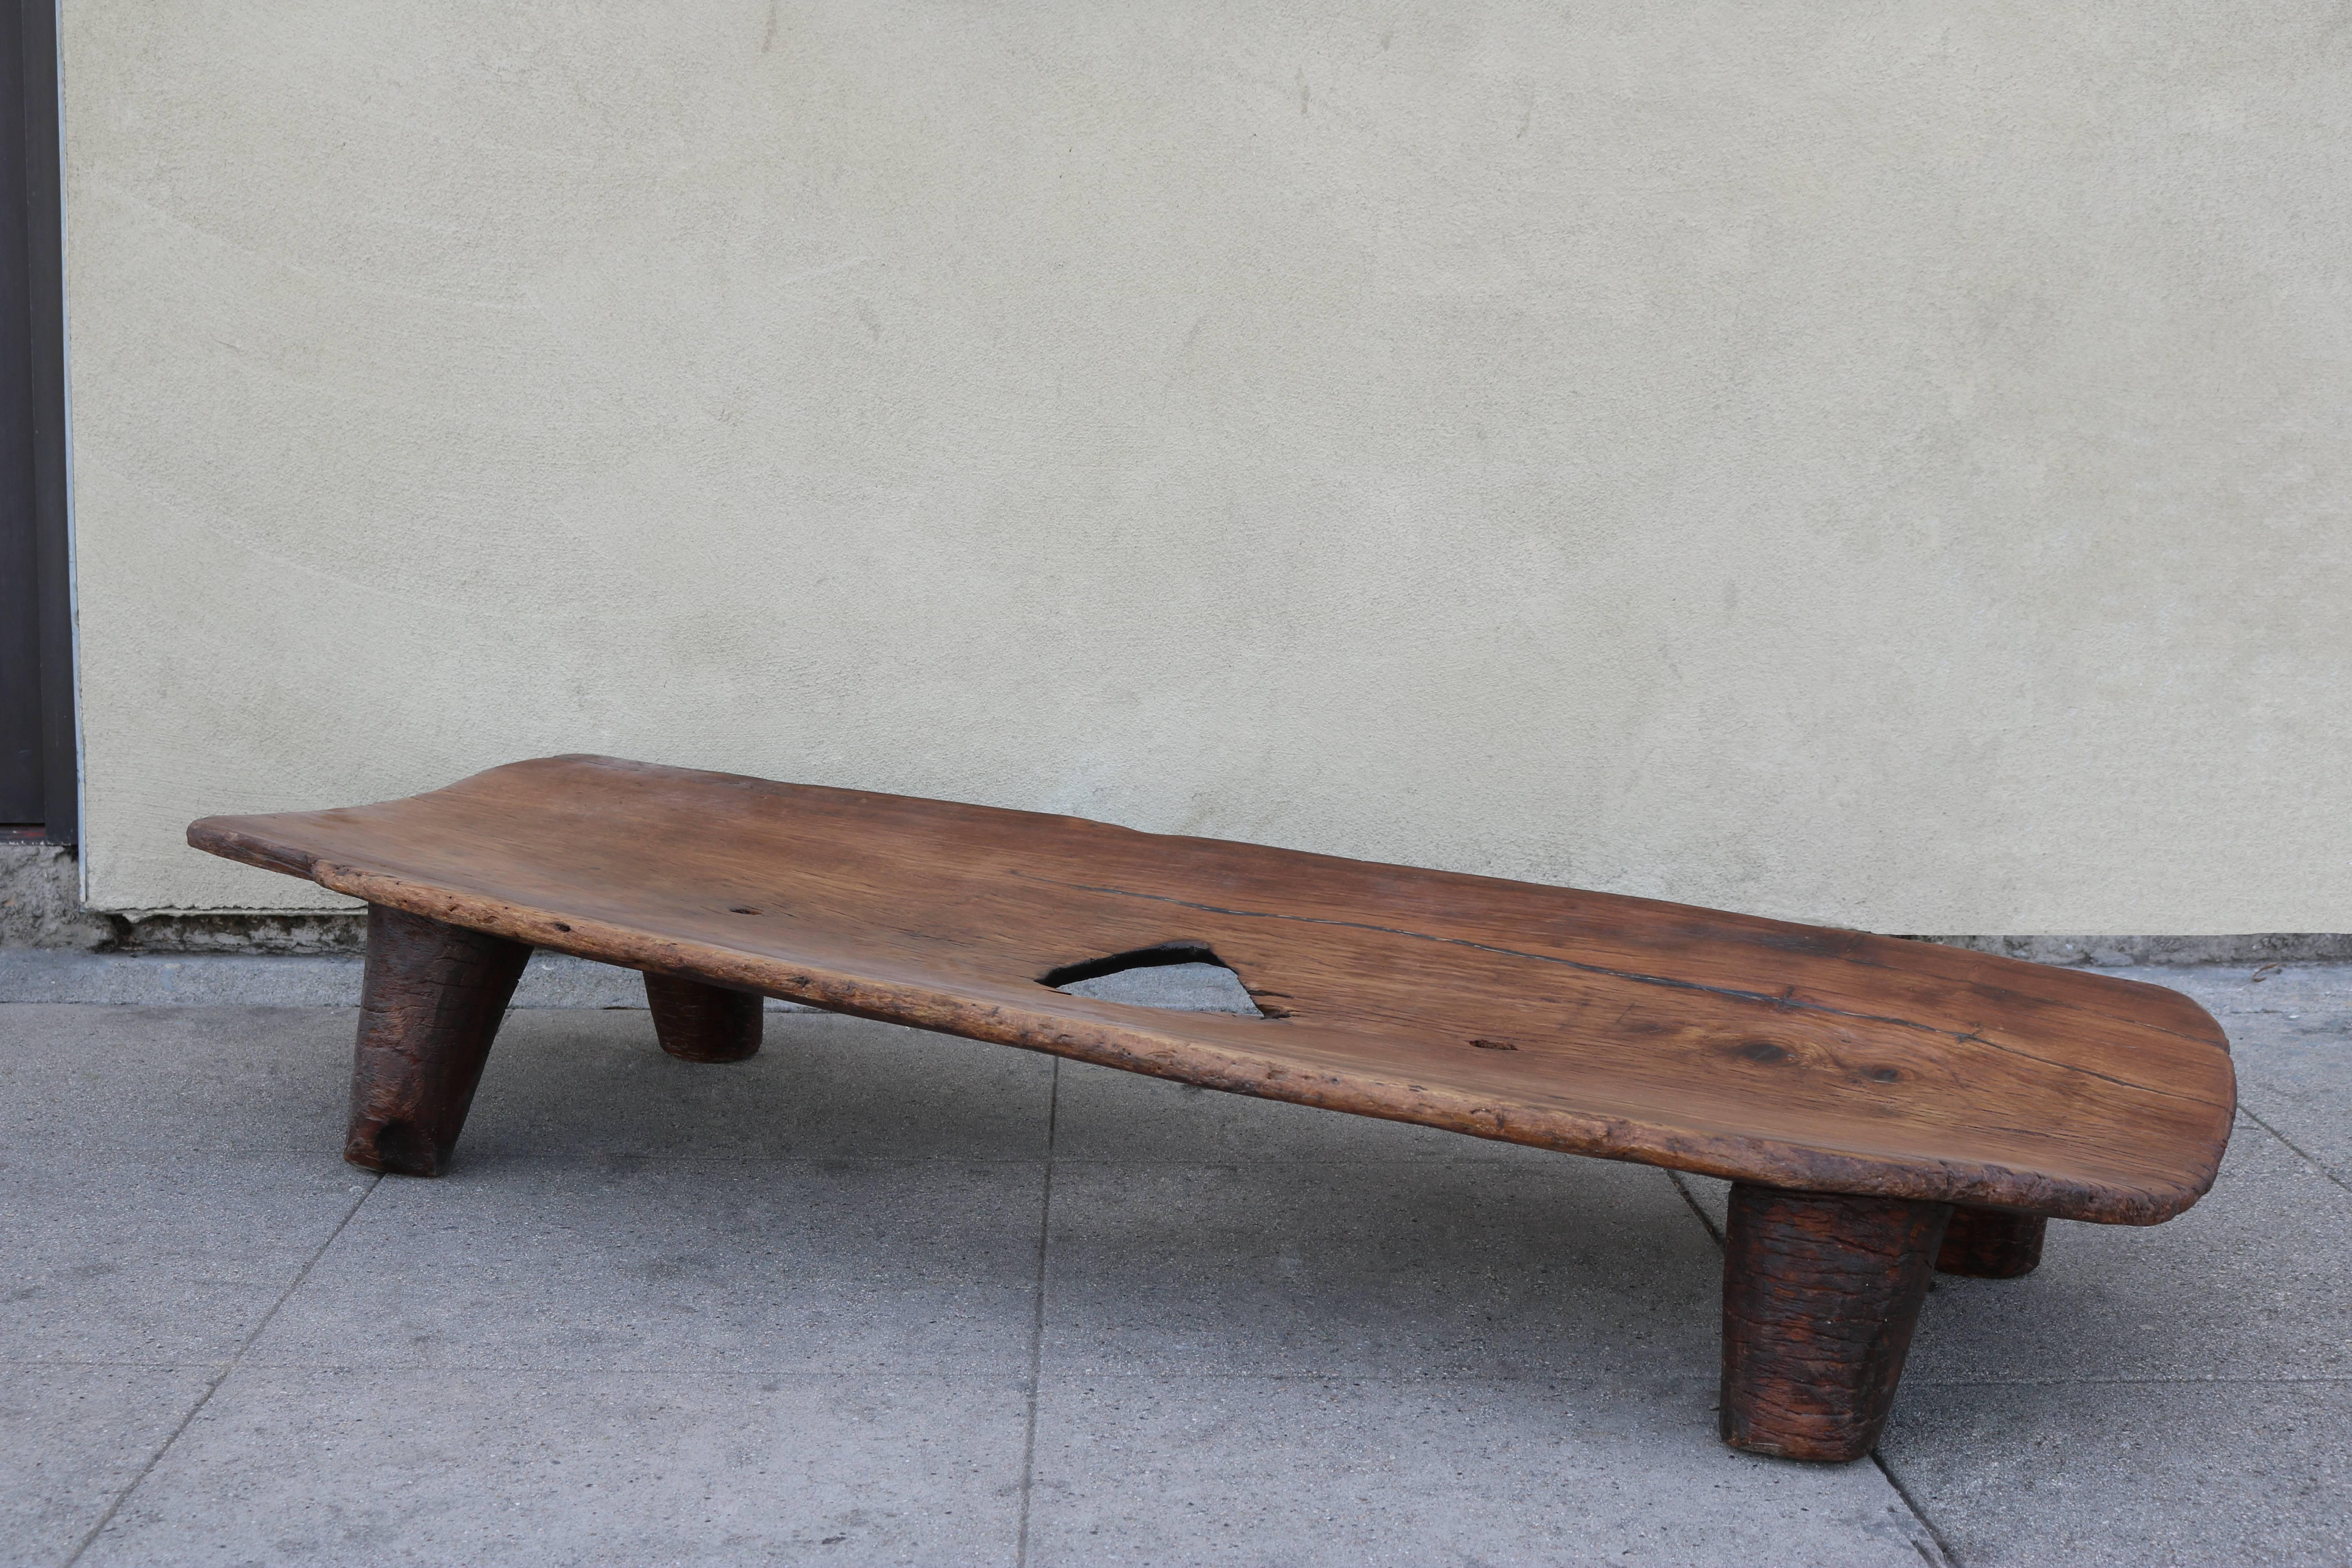 Antique carved wood bed can be used as a low bench or even coffee table. 
The Nupe people are living near the confluence of the Niger and Kaduna rivers in west-central Nigeria.